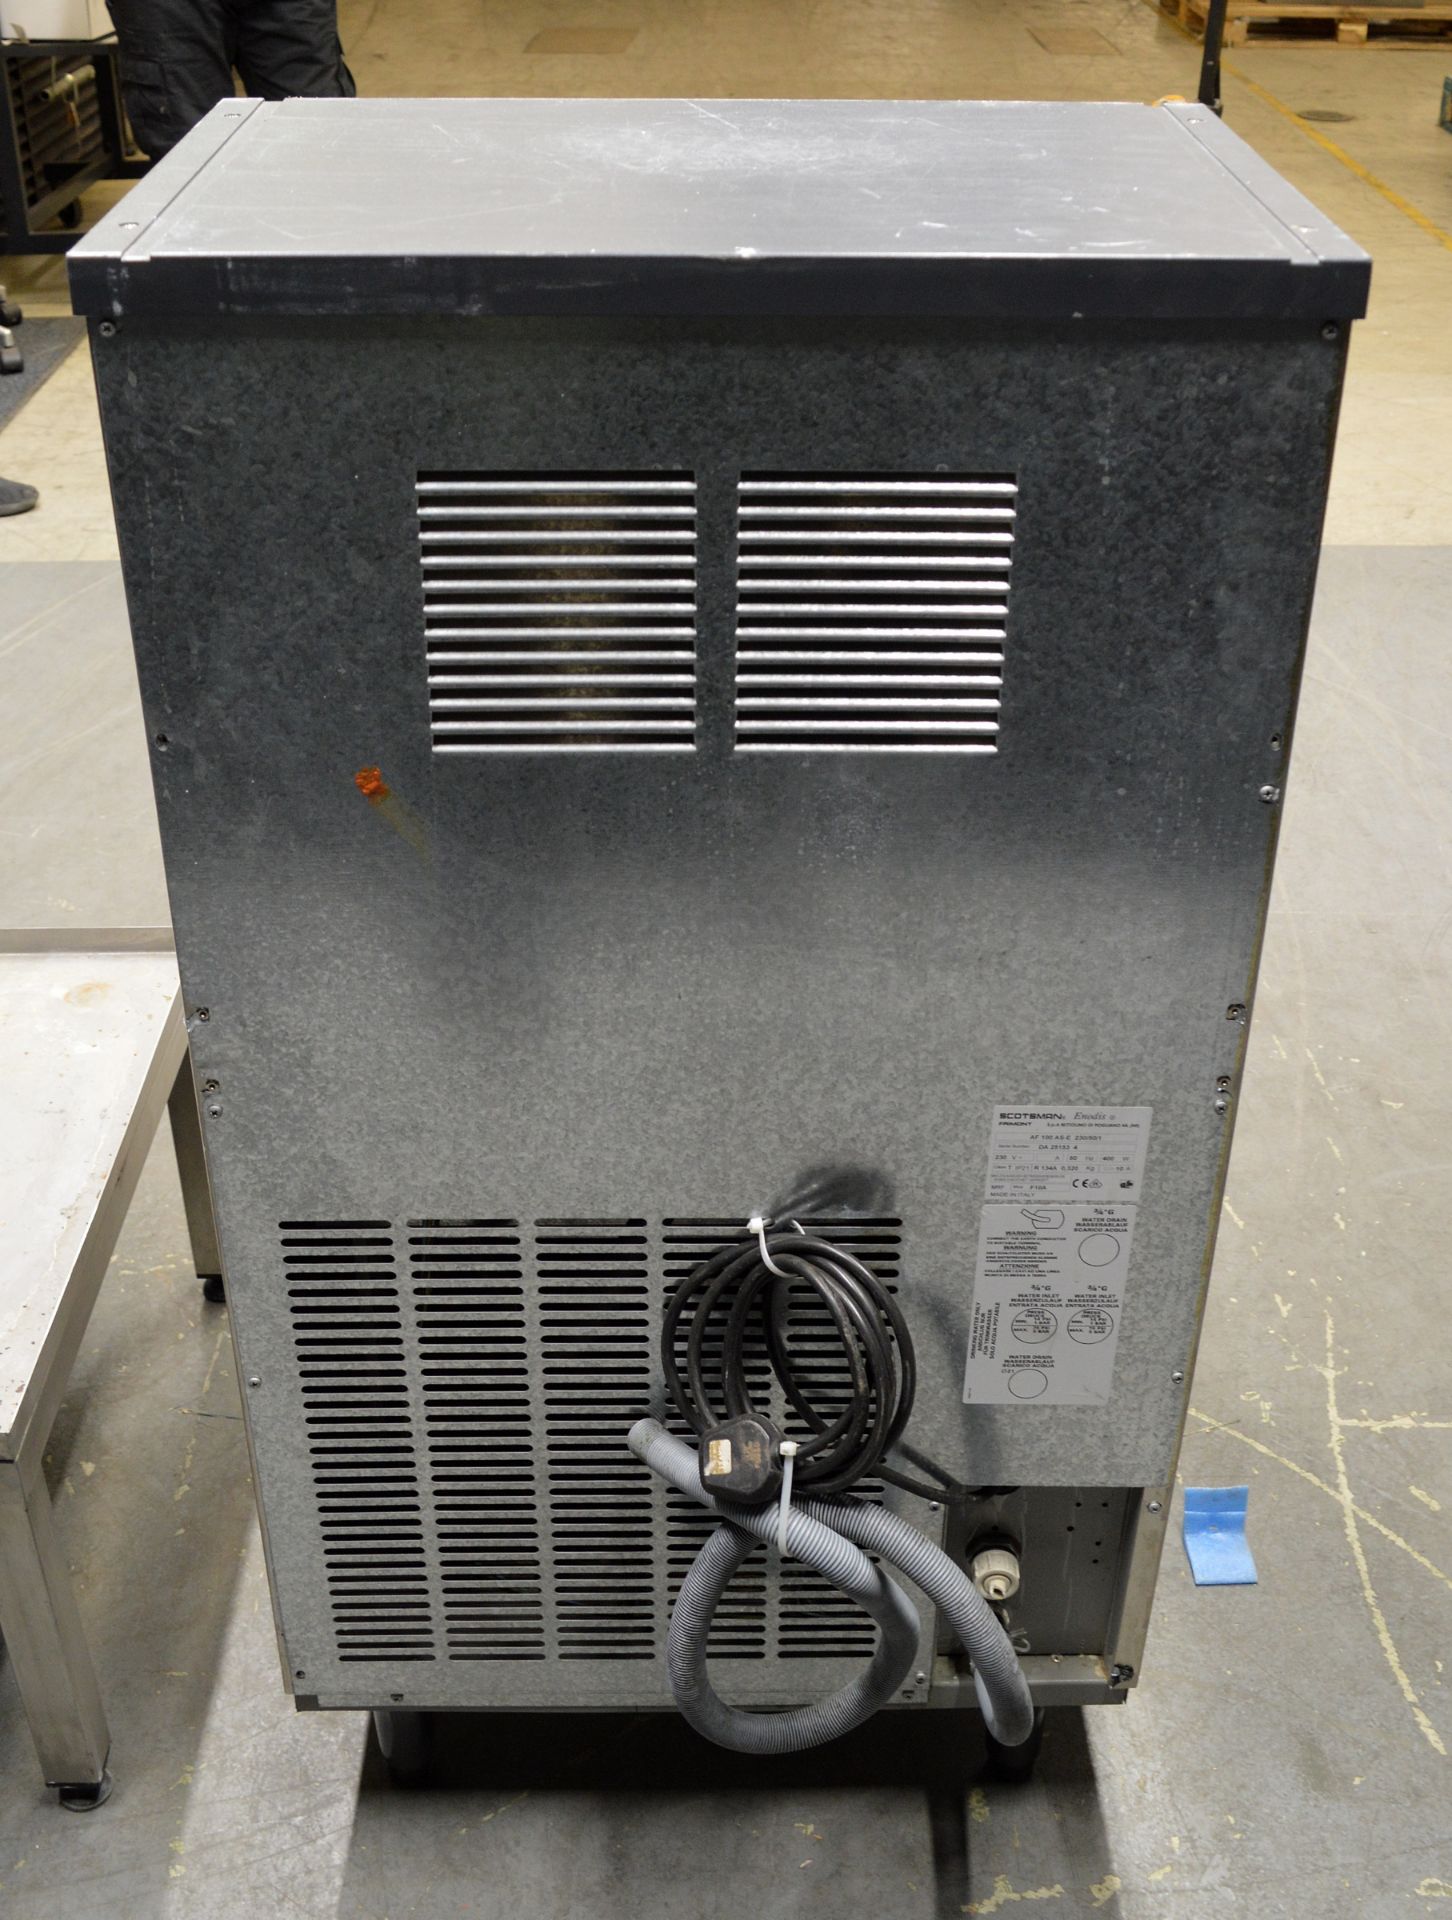 Scotsman AF 100 AS-E 230/50/1 Ice Flaker Machine with Stand, single phase electric - Image 5 of 7